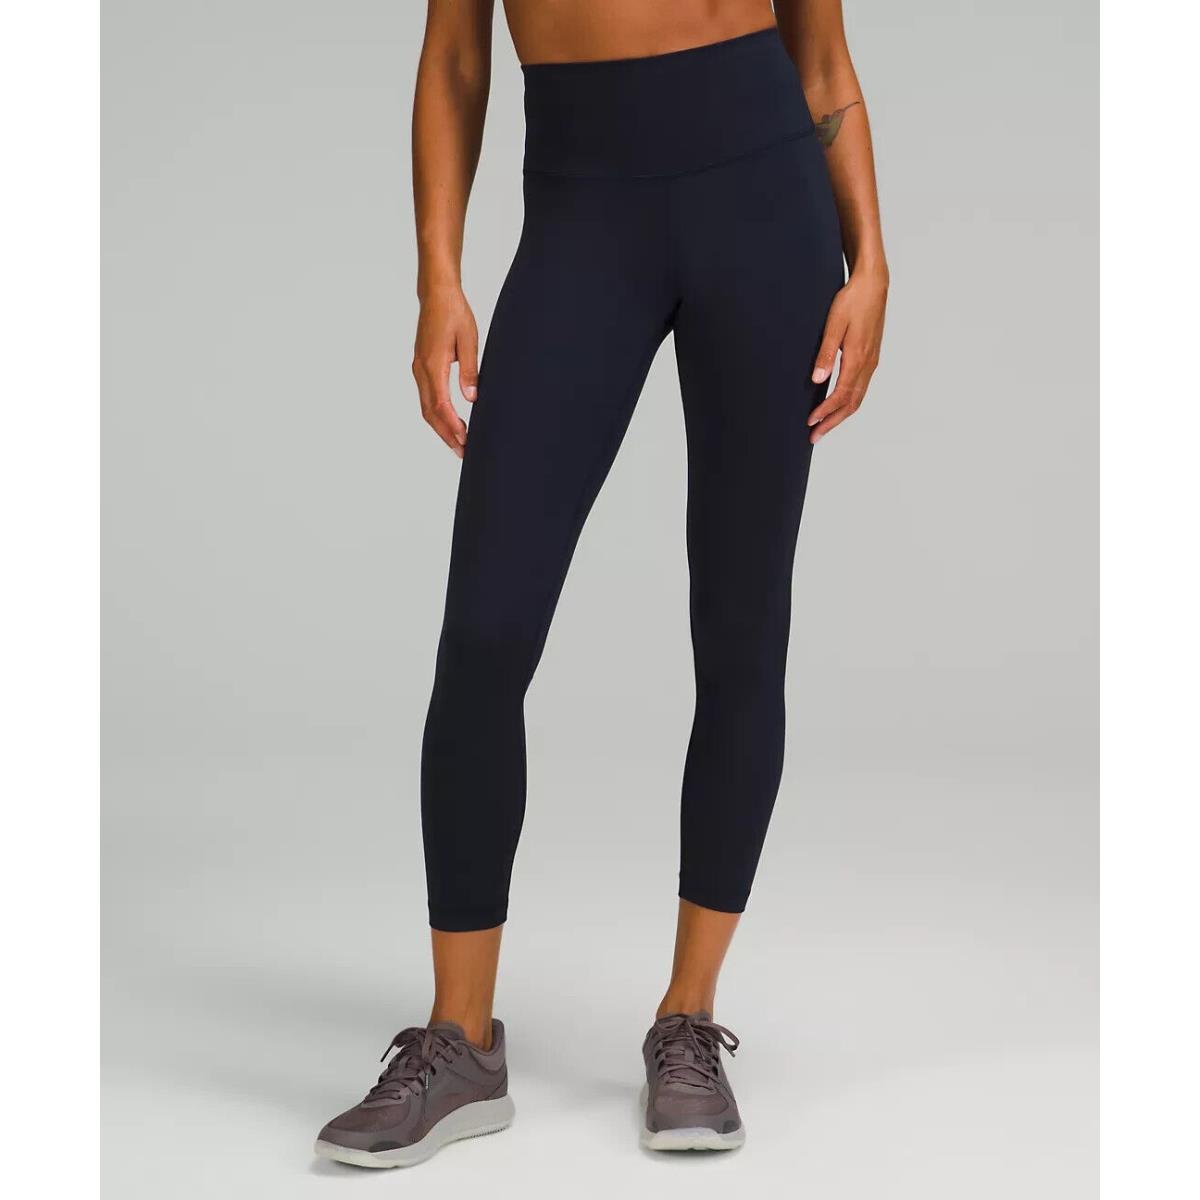 Lululemon Wunder Train High-rise Tight 25 Color True Navy Size 8. LW5CQDS